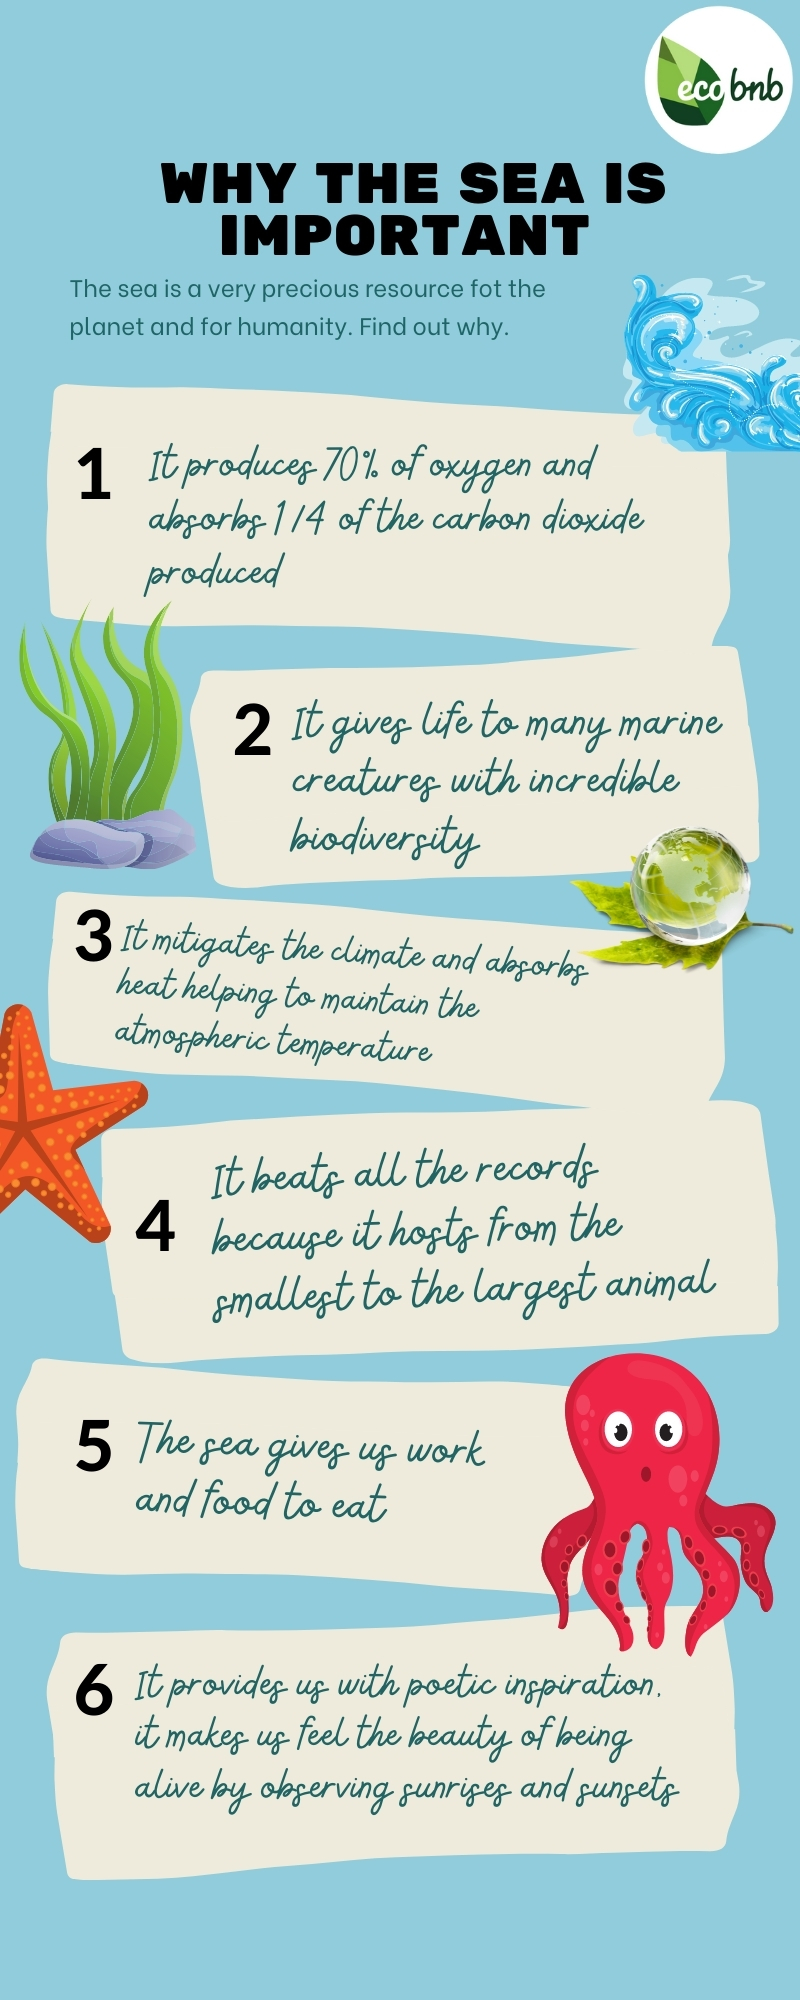 6 reasons why the sea is important